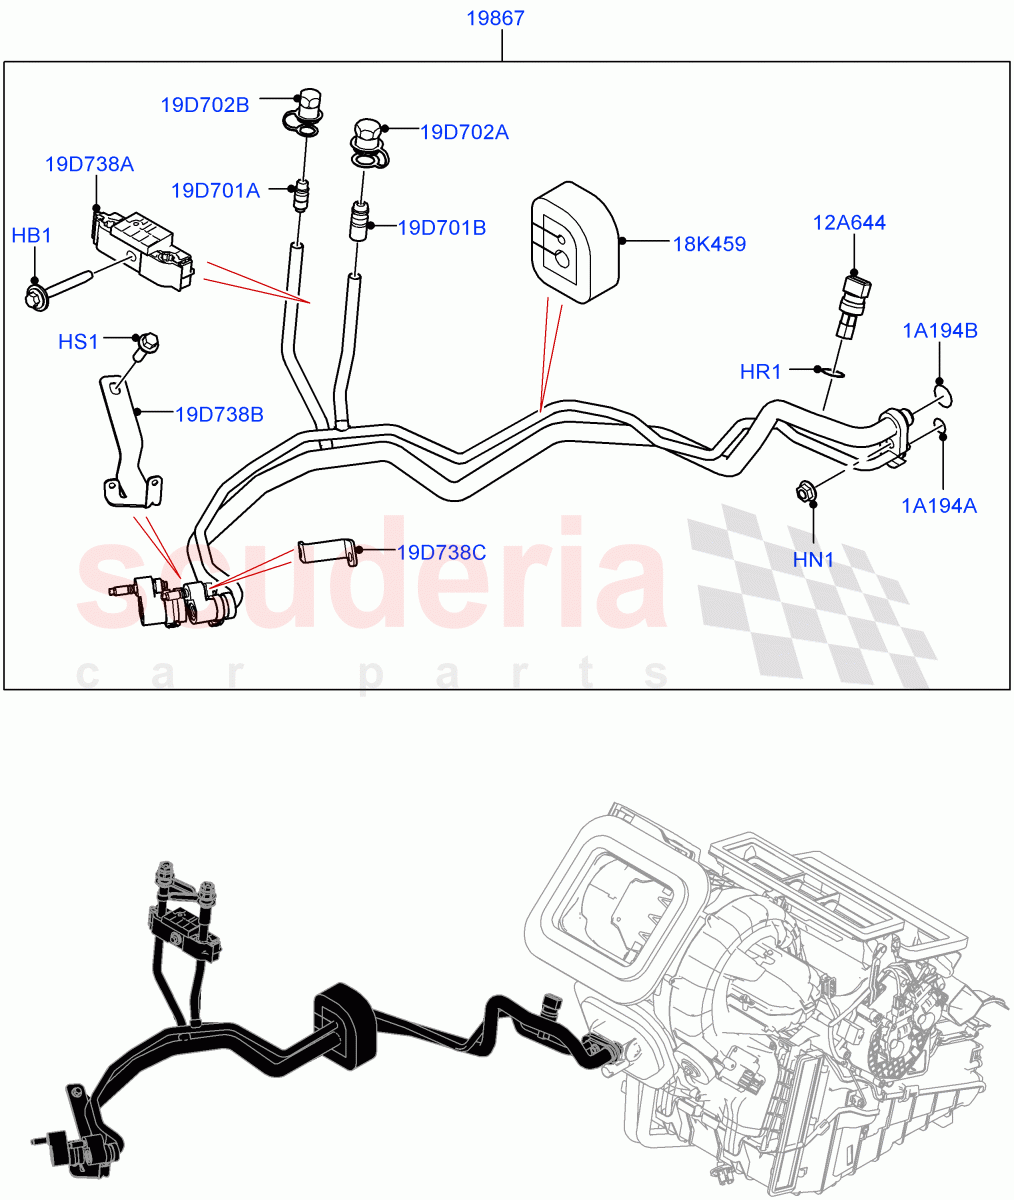 Air Conditioning System(Changsu (China),Less Chiller Unit)((V)FROMKG446857) of Land Rover Land Rover Discovery Sport (2015+) [2.0 Turbo Petrol AJ200P]